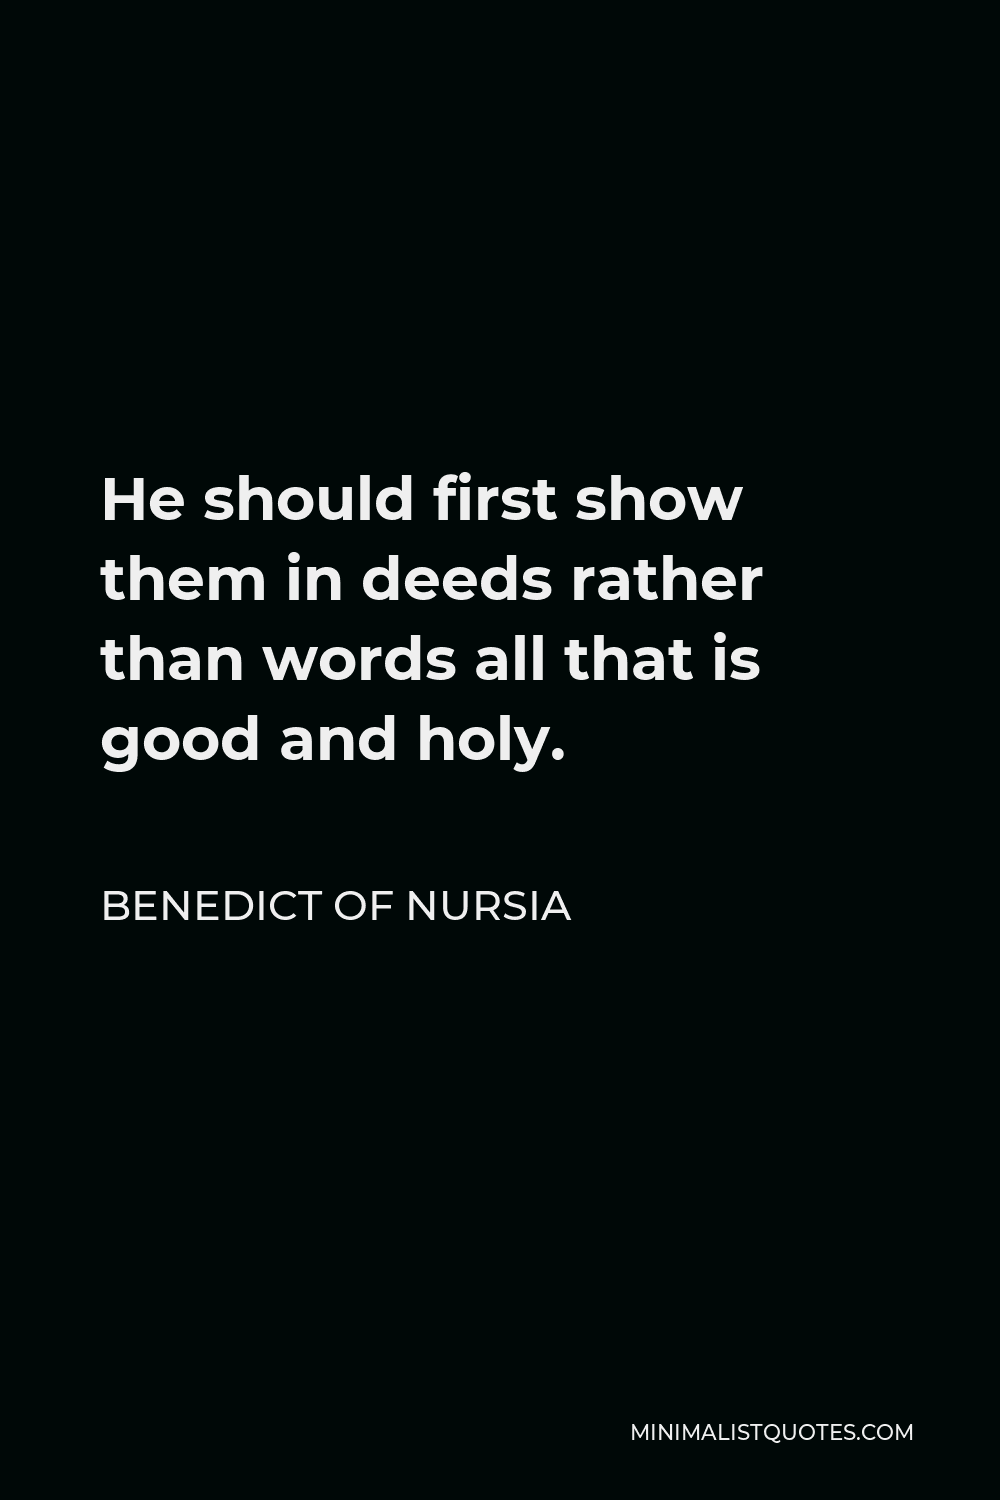 Benedict of Nursia Quote - He should first show them in deeds rather than words all that is good and holy.